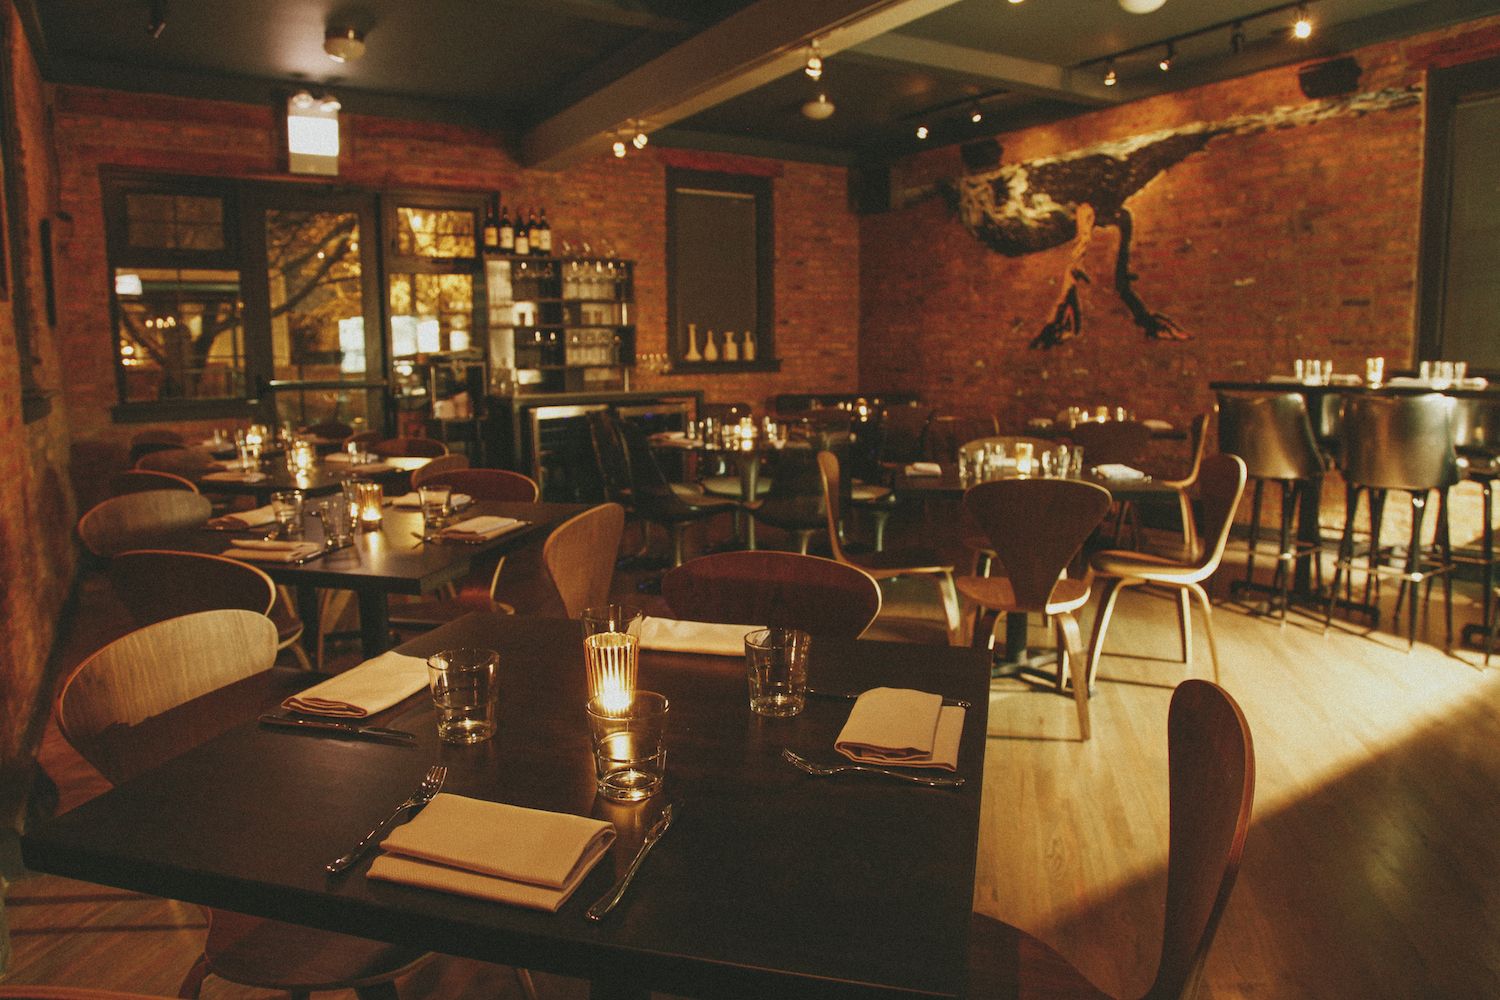 Dim-lit dining room with dark-colored seating and decorated brick walls